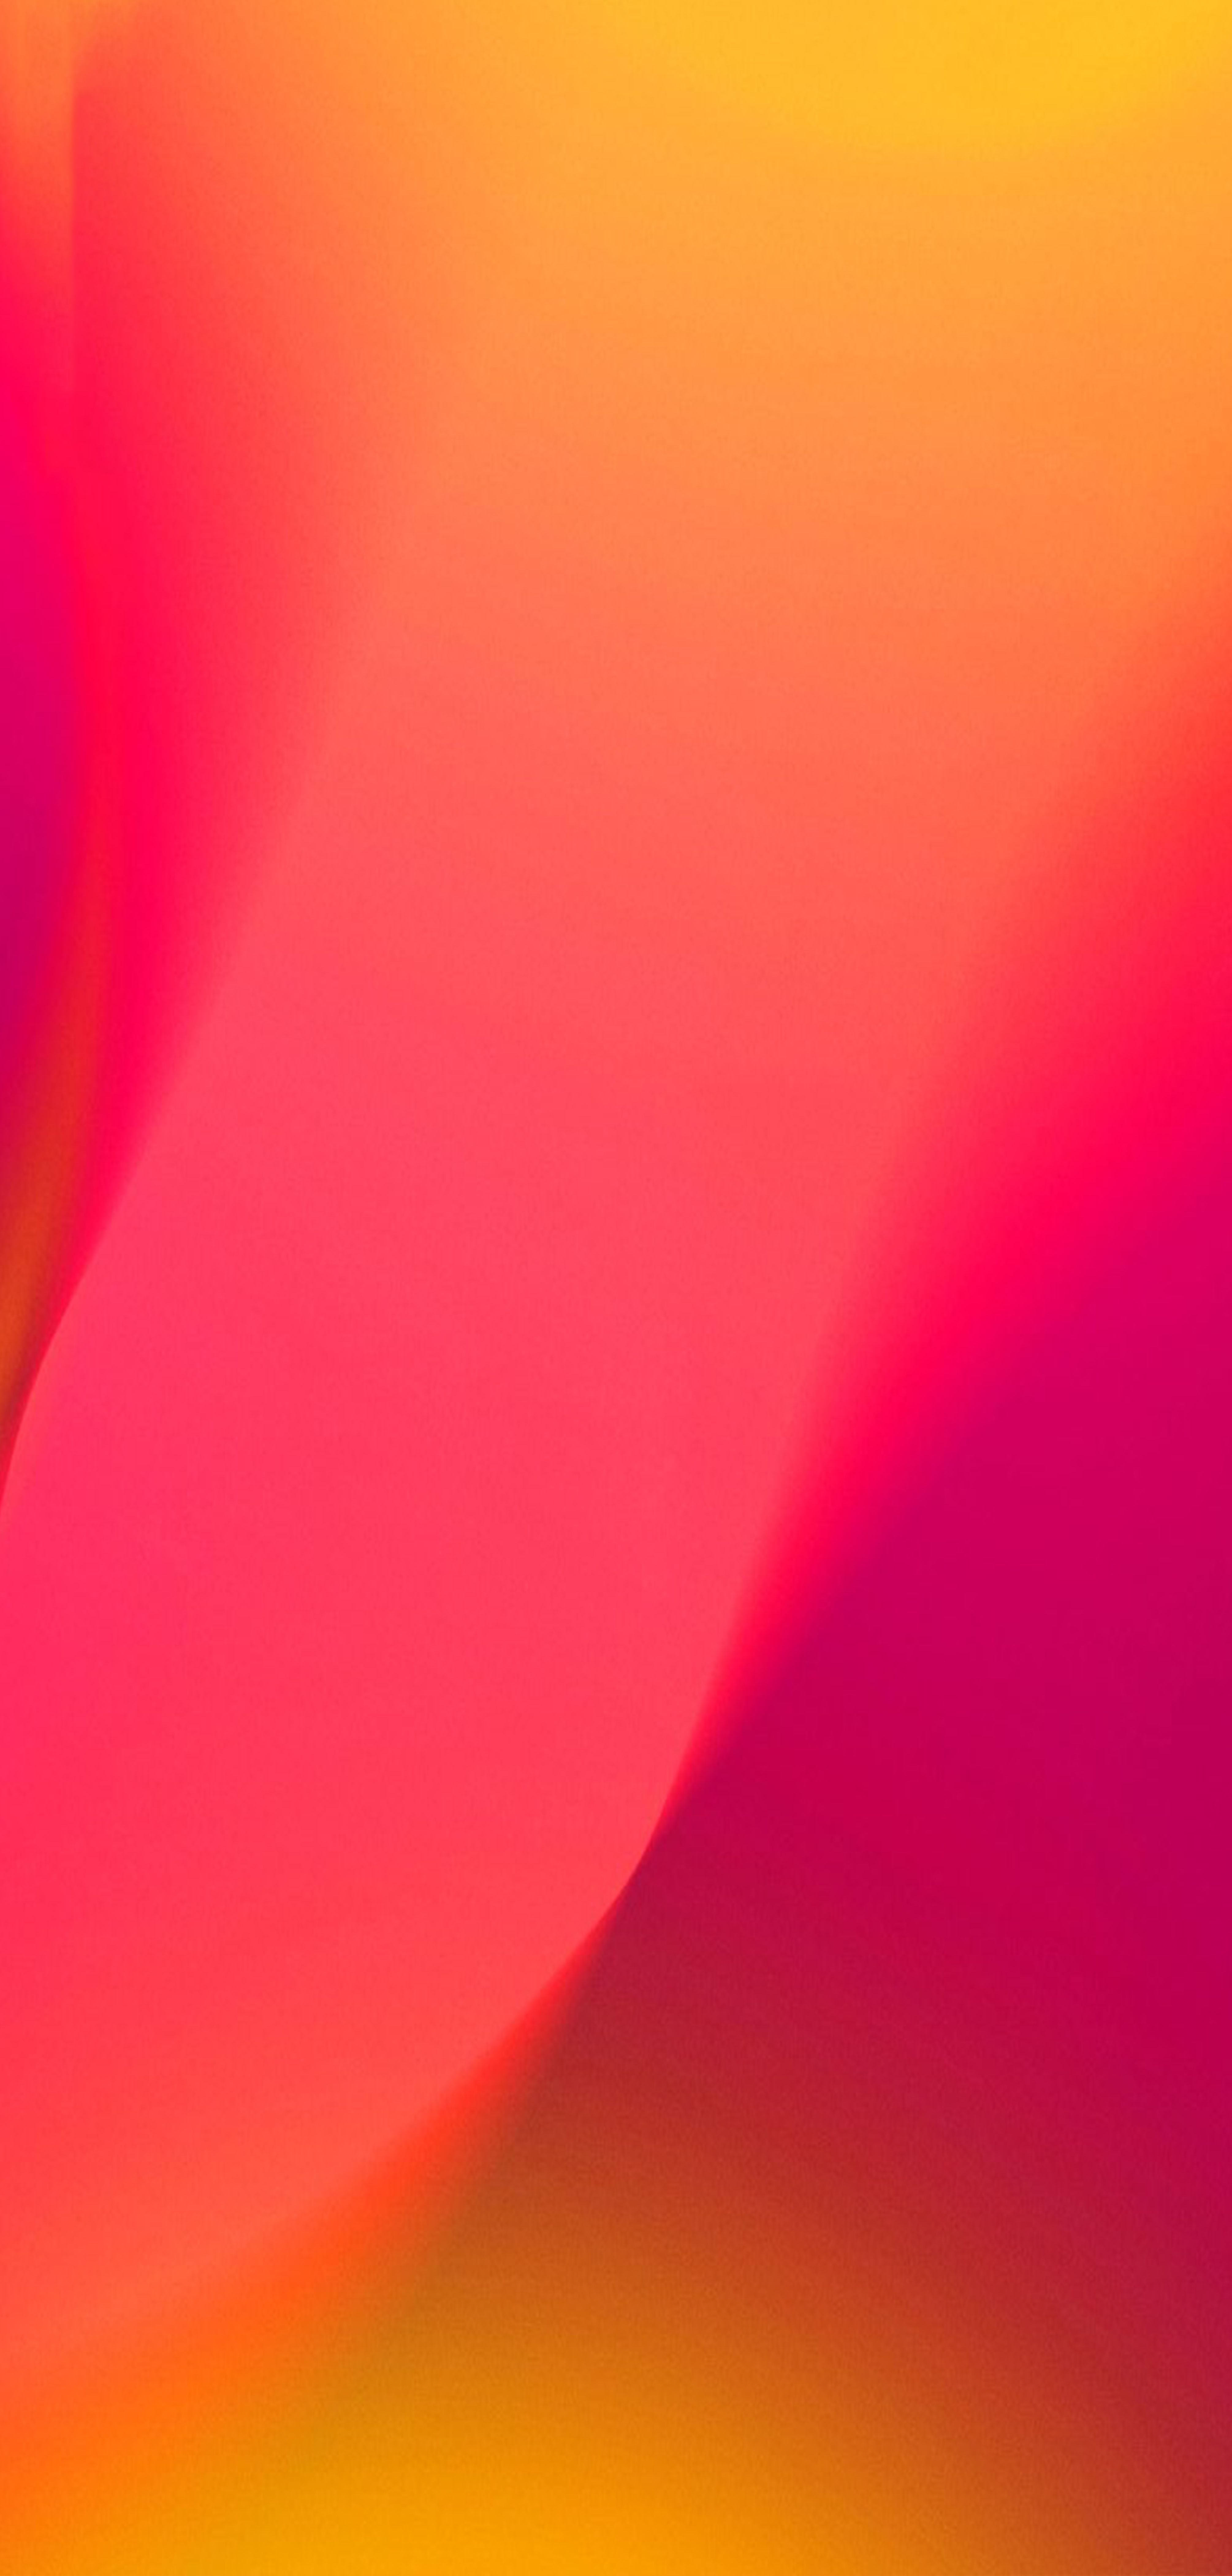 Best iPhone and Android Wallpaper: Vibrant Shapes & Gradients Background for iPhone and Android. Android wallpaper, Unique wallpaper, Pink wallpaper iphone